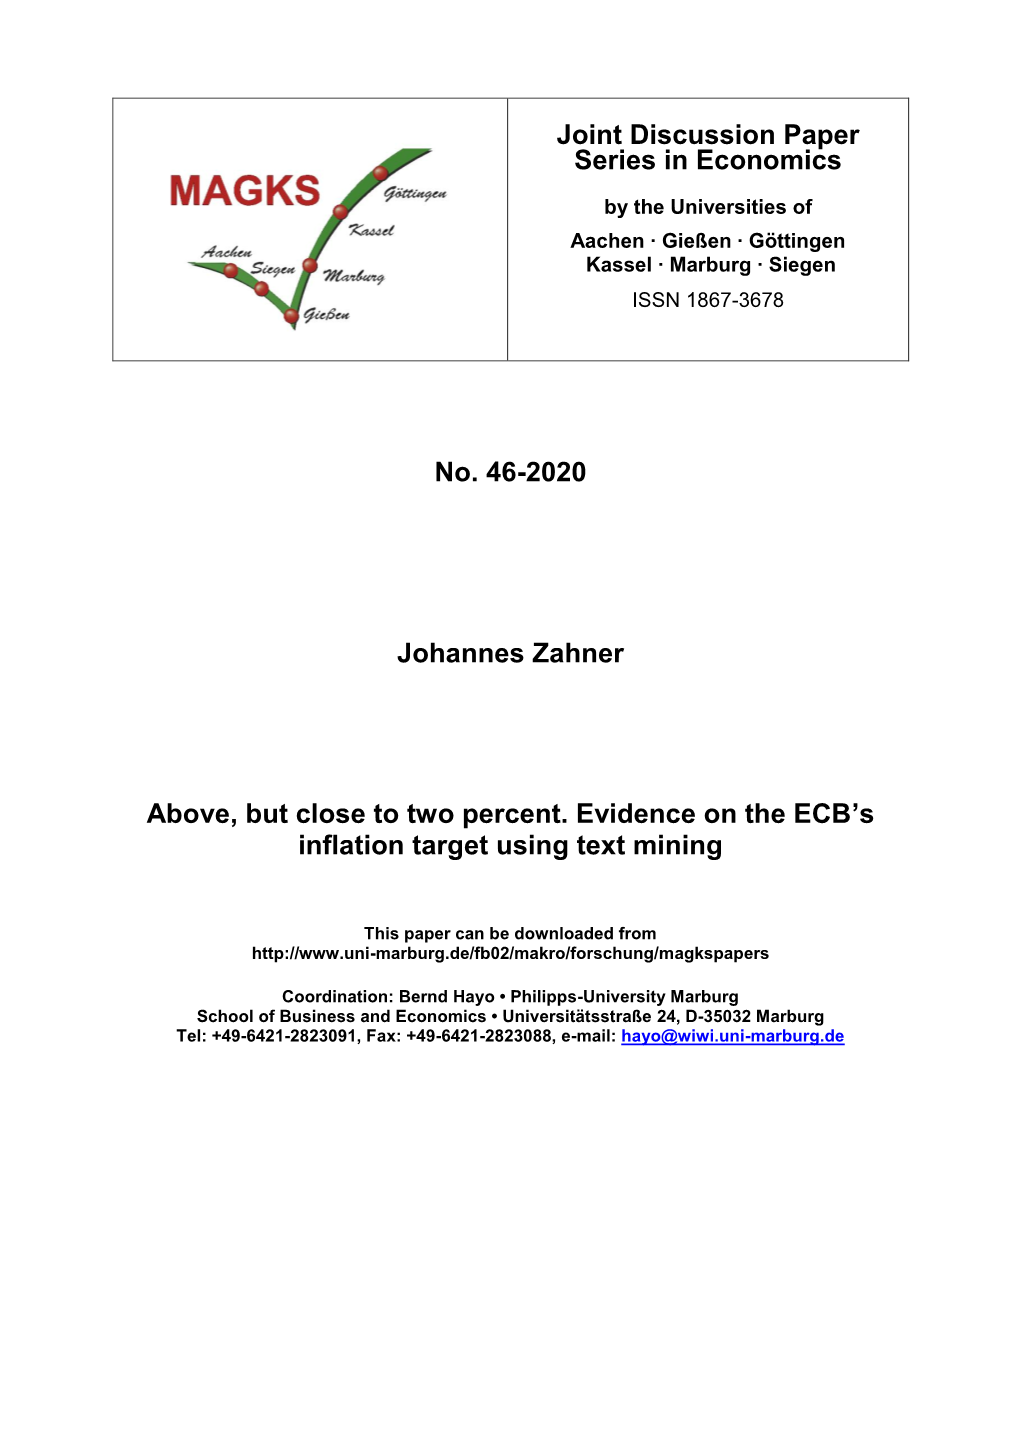 Above, but Close to Two Percent. Evidence on the ECB’S Inflation Target Using Text Mining